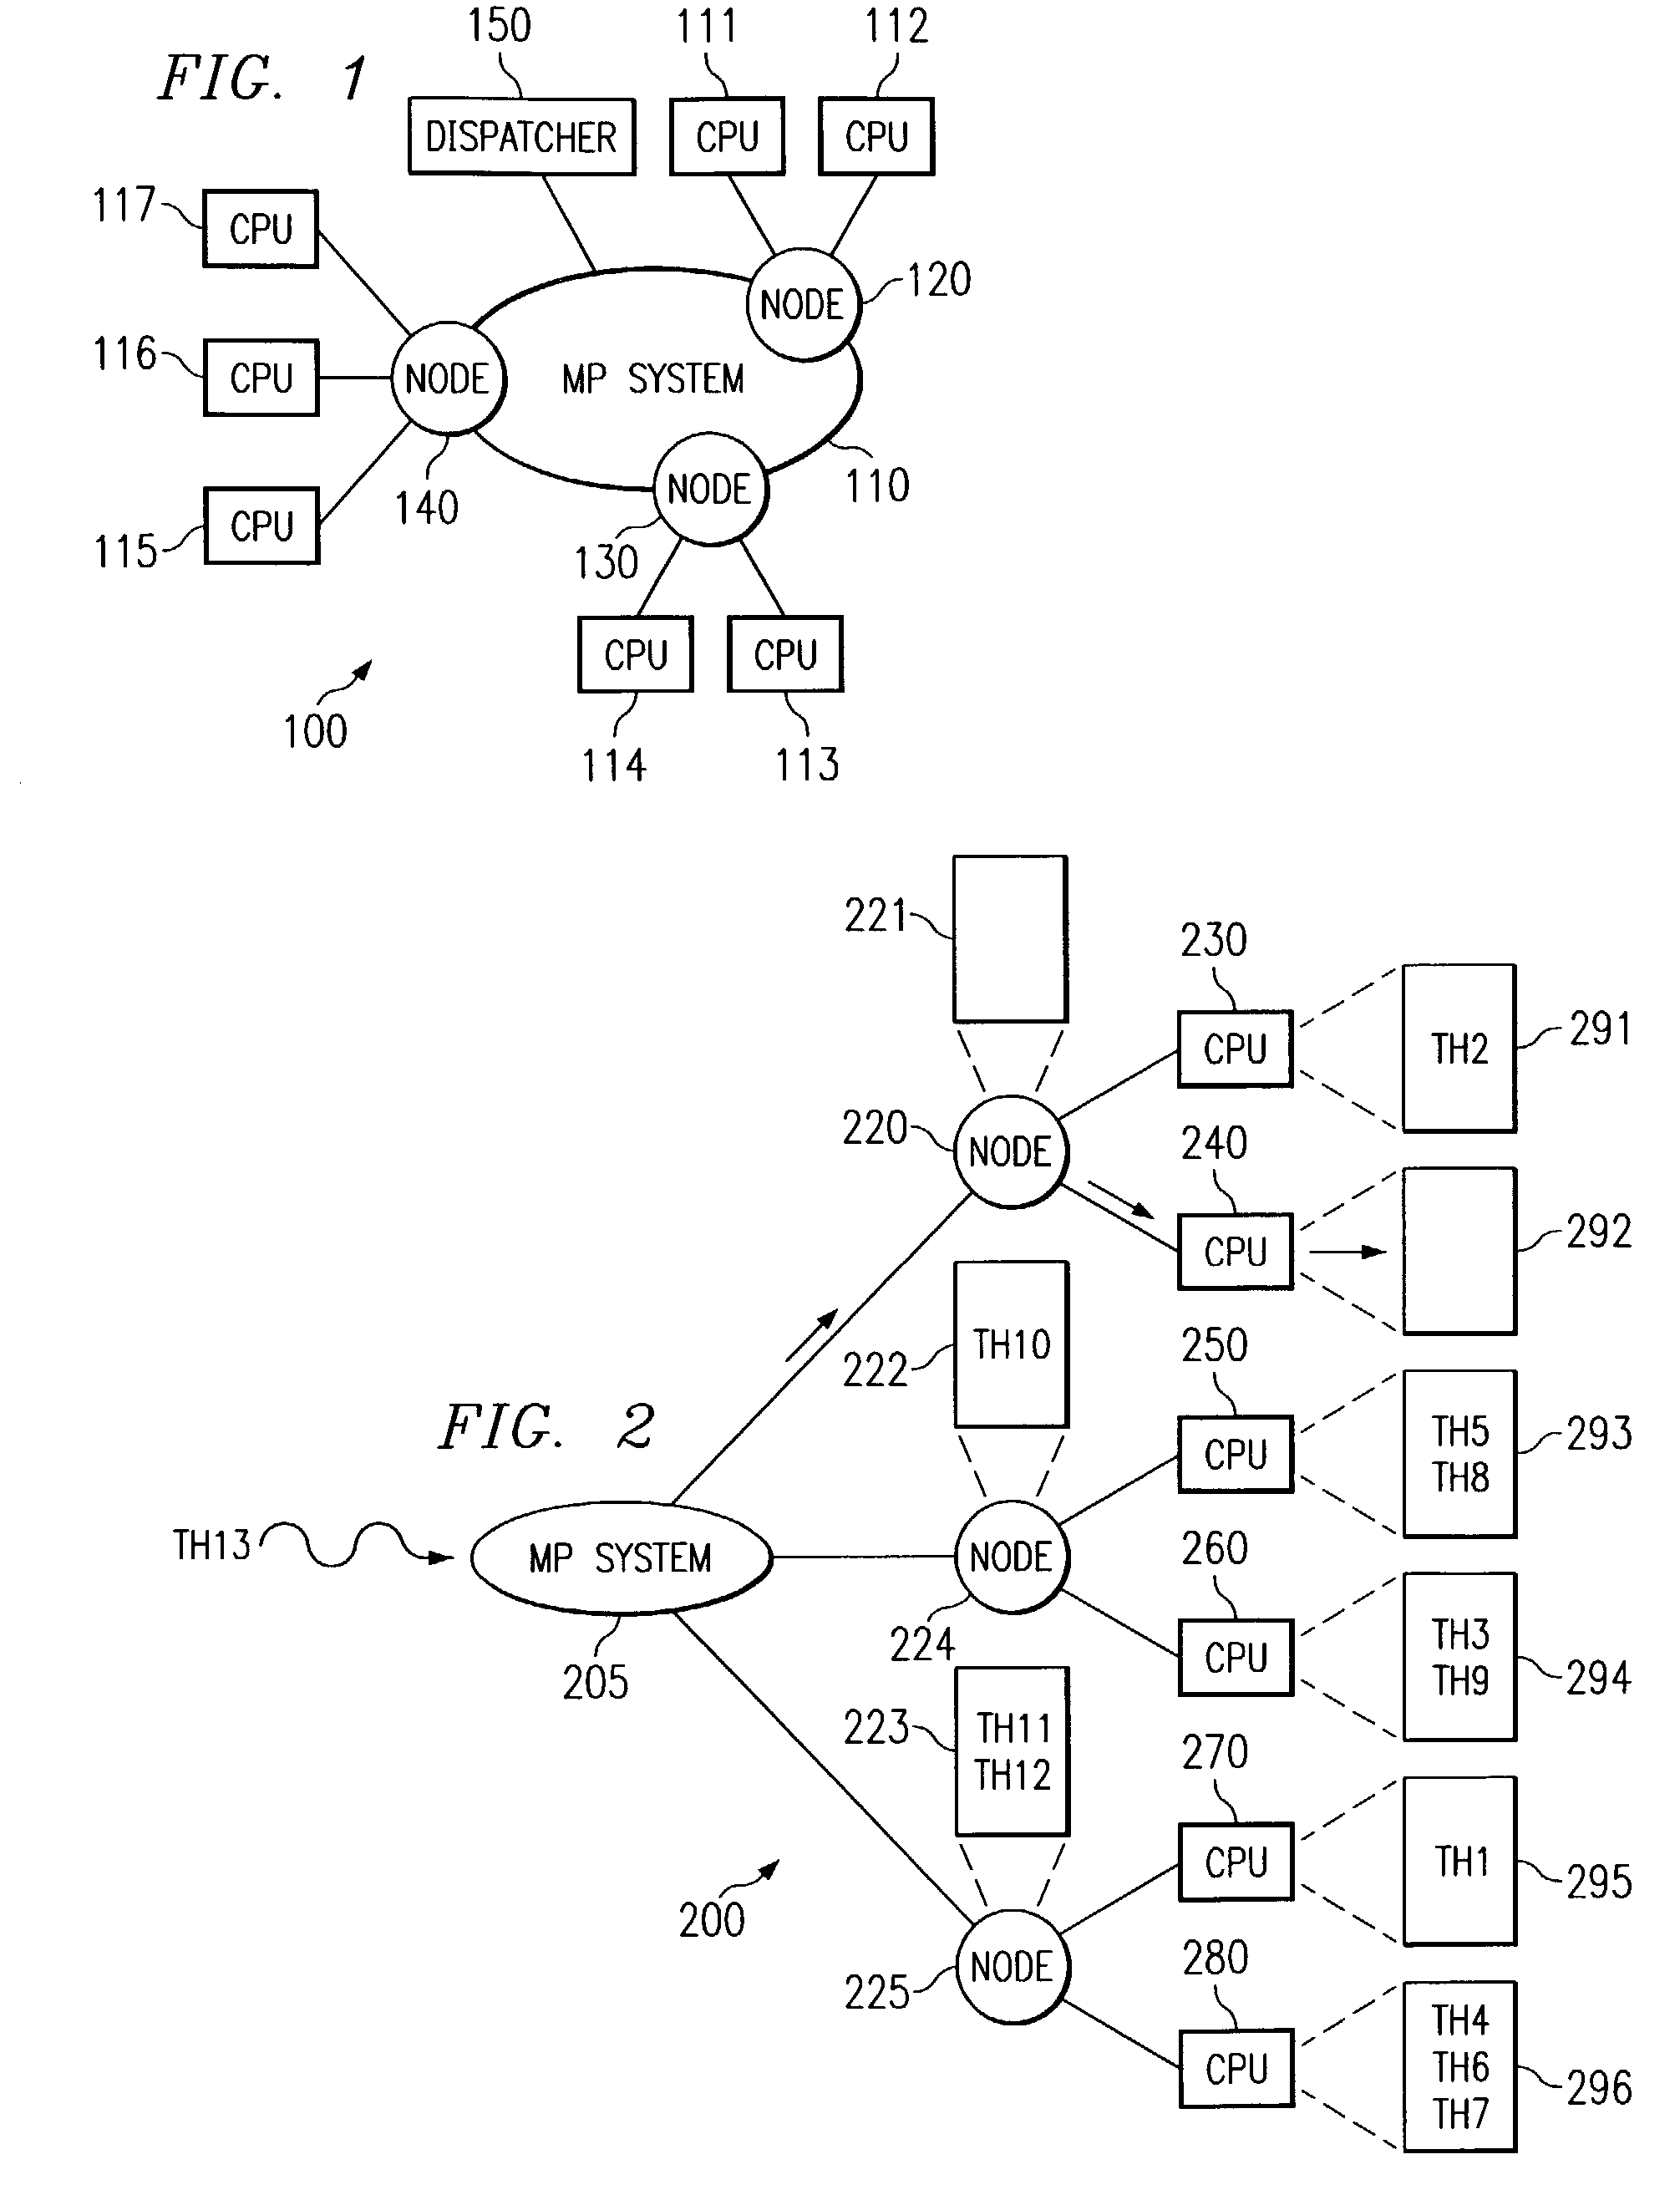 Apparatus and method for load balancing of fixed priority threads in a multiple run queue environment